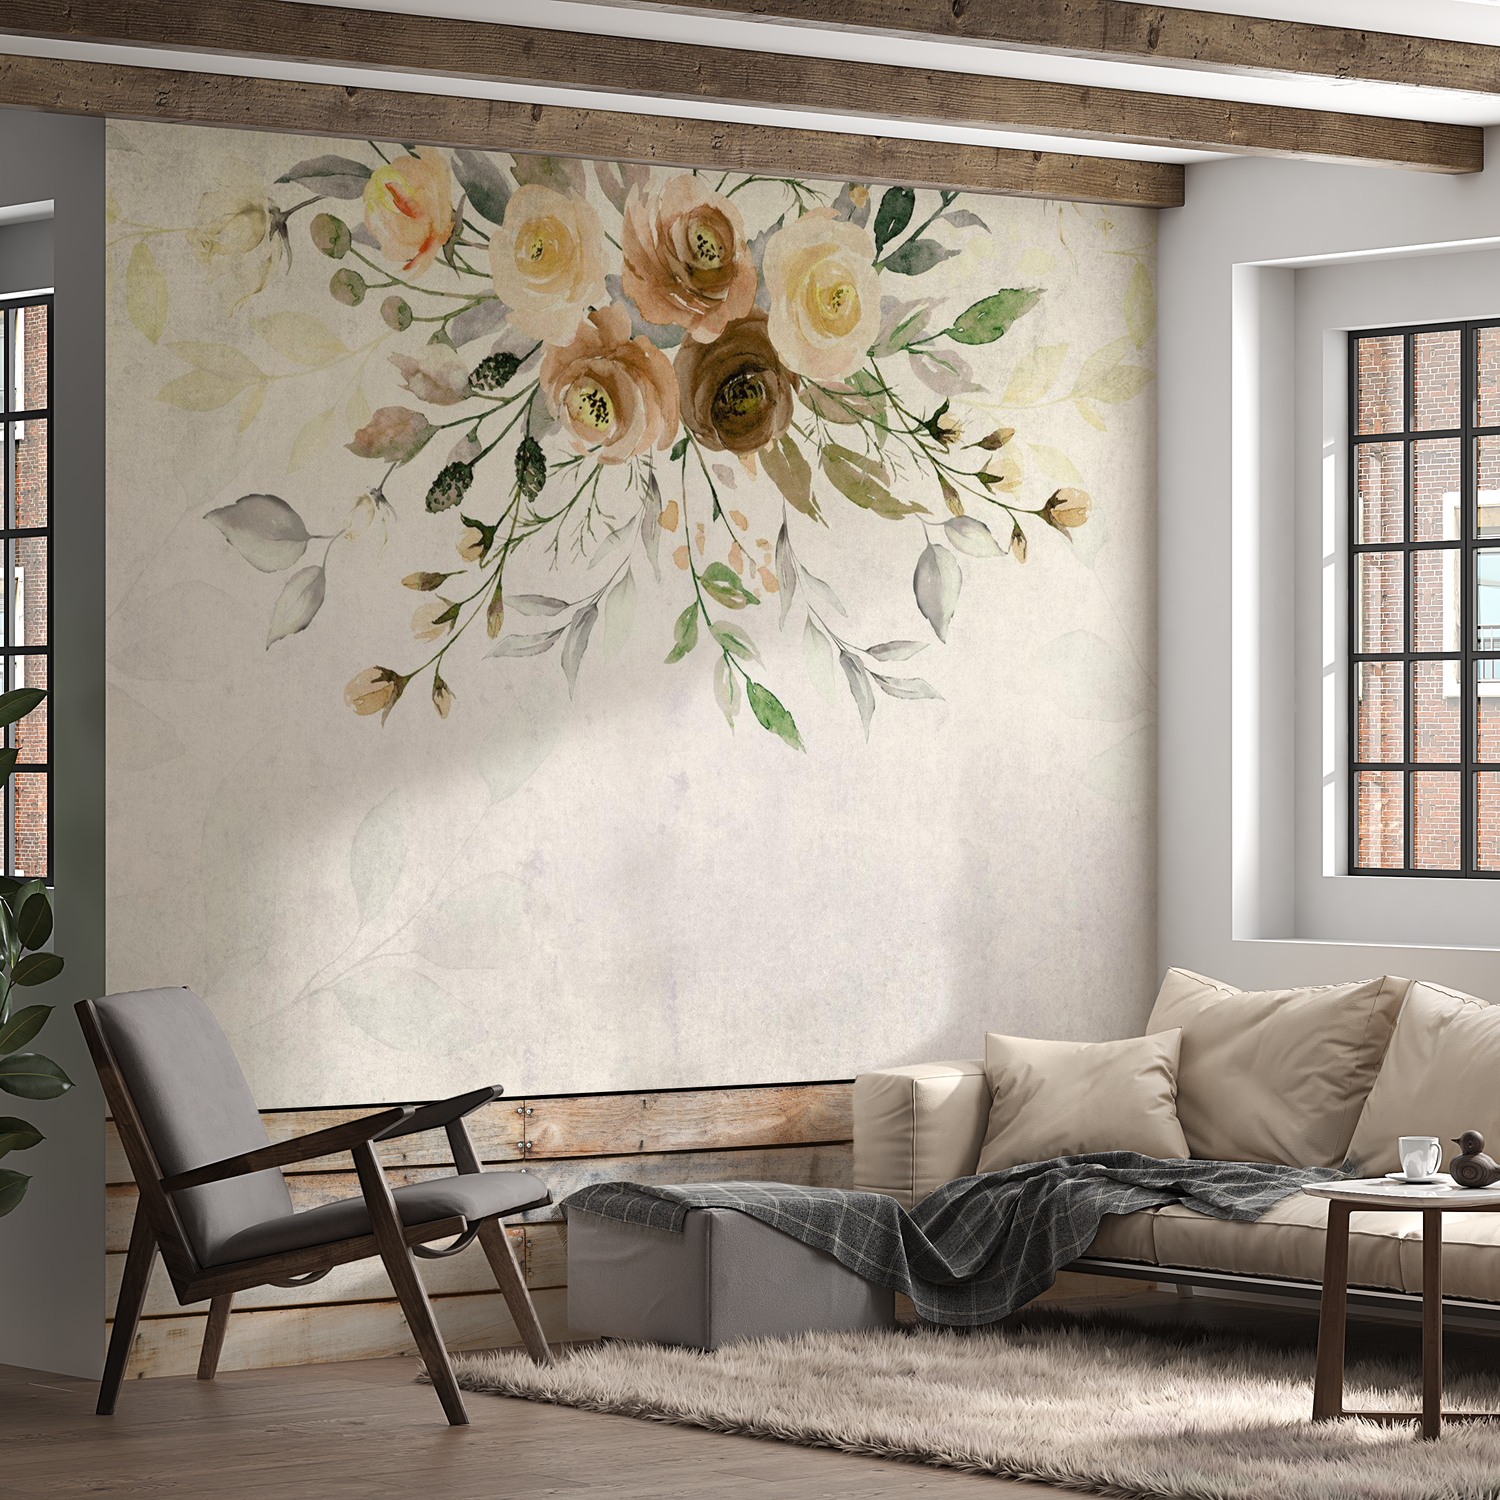 Peel & Stick Floral Wall Mural - Retro Summer Bloom - Removable Wallpaper 38"Wx27"H